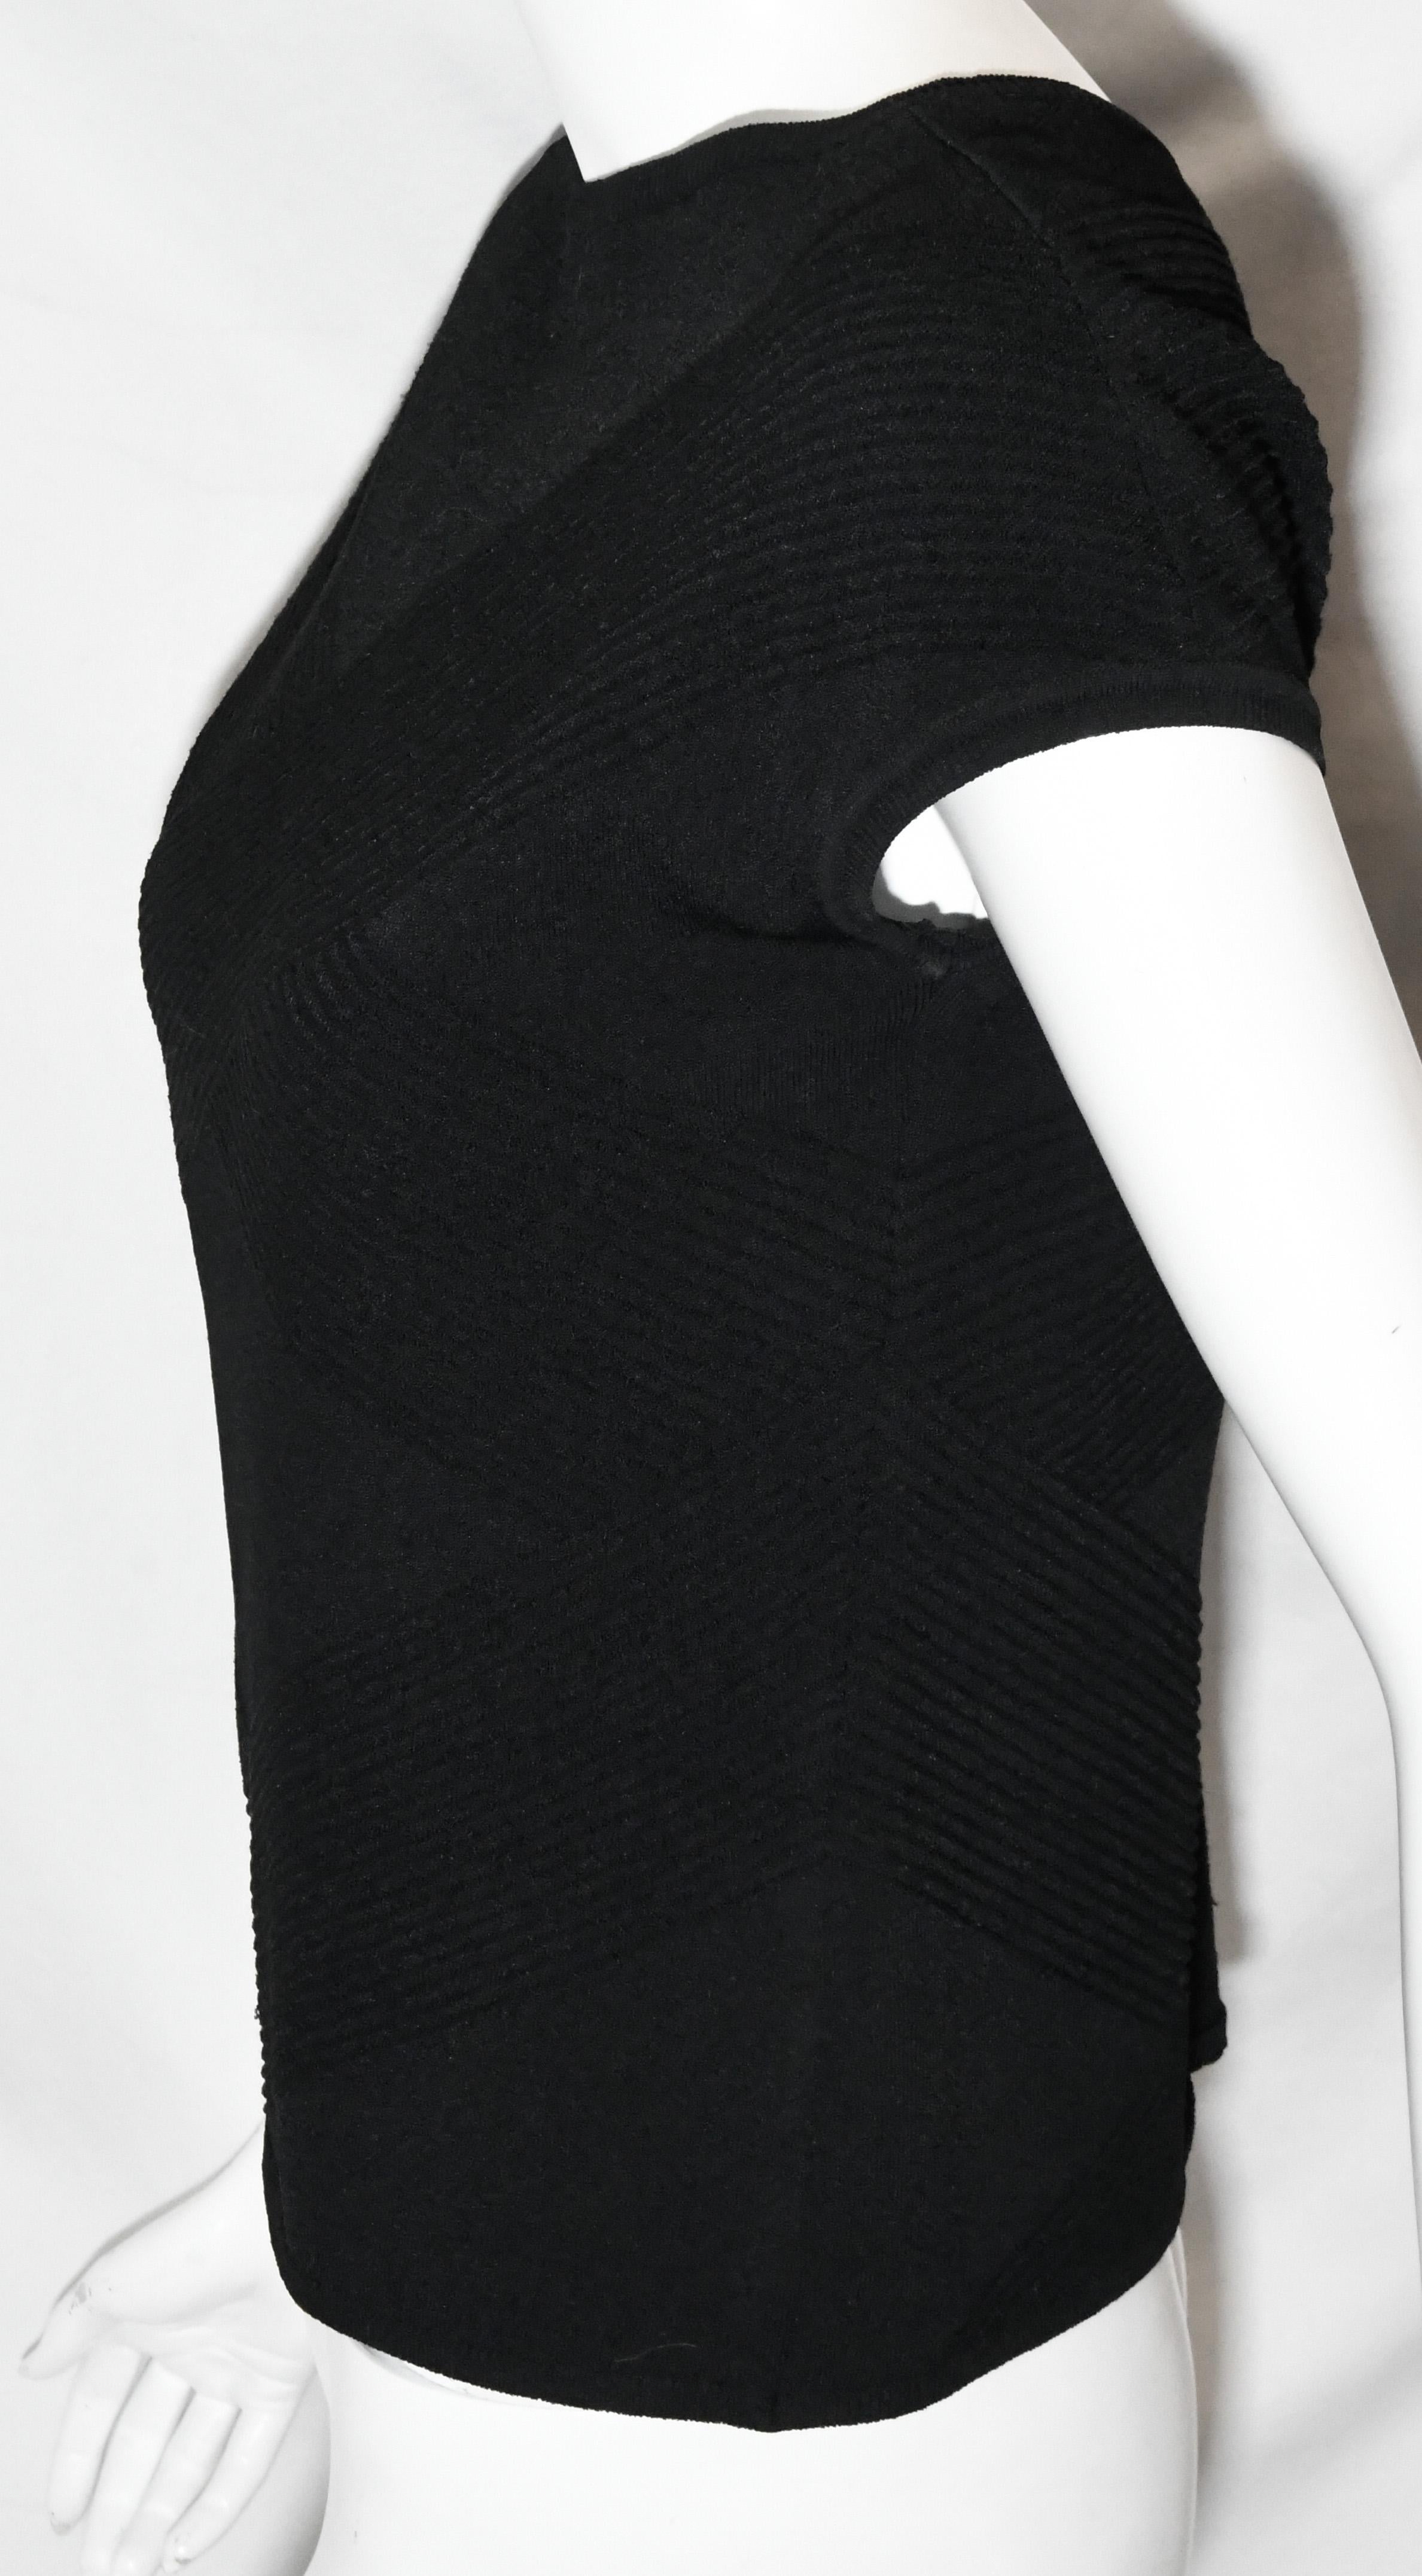 Chanel black knit top is from the 2003 Fall collection.  This classic cap sleeve top con be worn by itself with jeans or under a suit to complement the Chanel look.   This top includes a CC Chanel mini plaque on the hem.  This top is unlined.  This